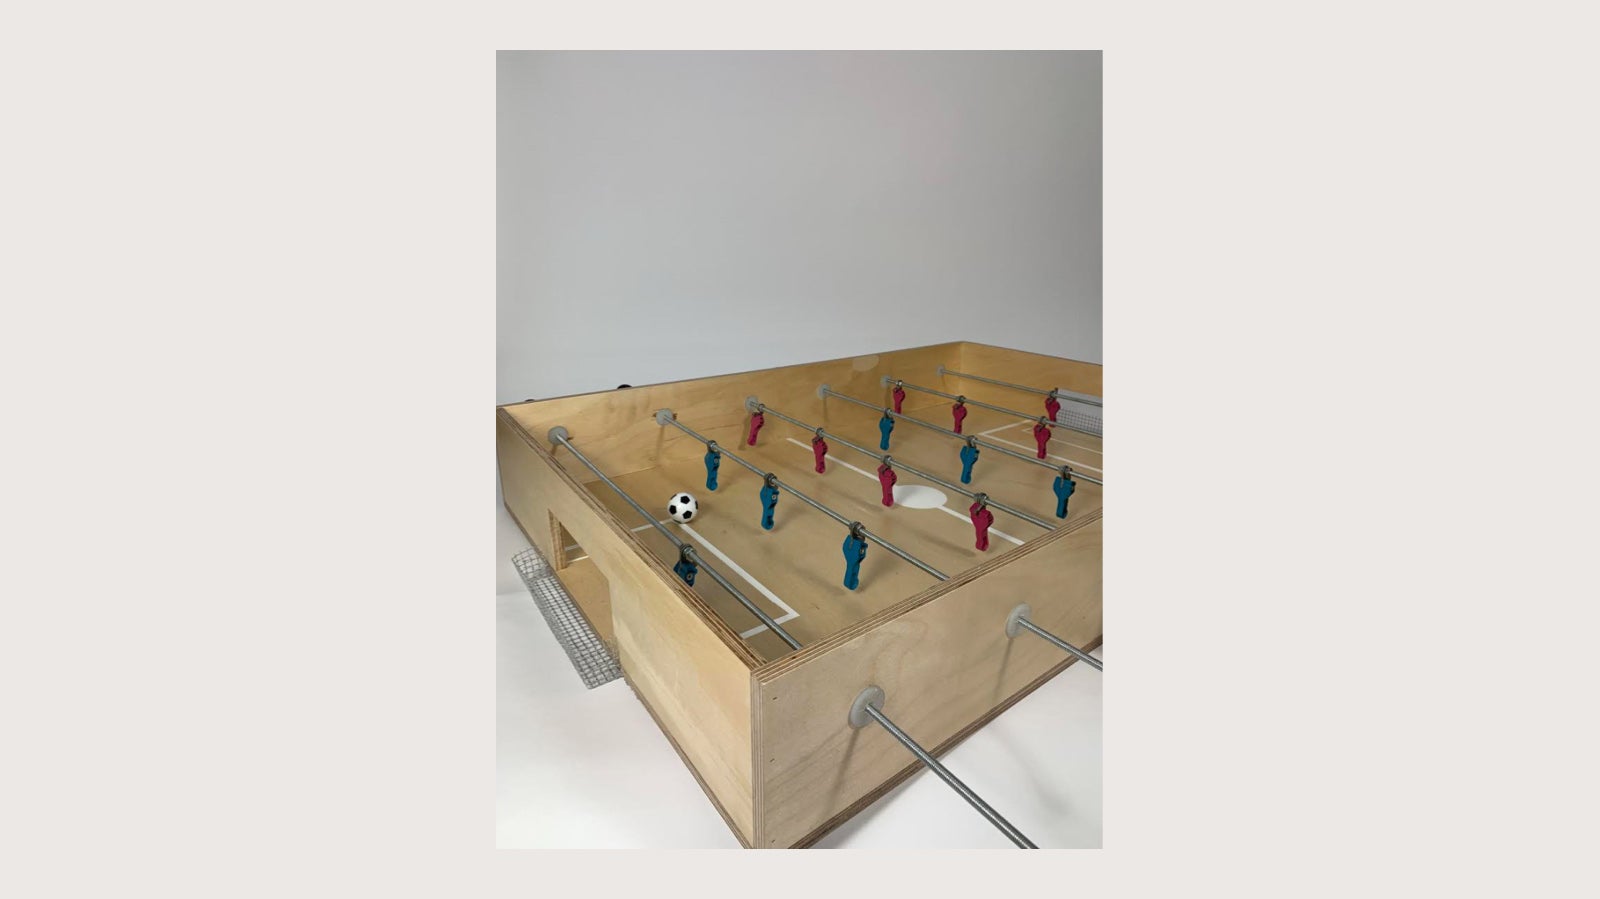 Table Football, designed by Saffron Parry and shown at Brompton Junction Covent Garden